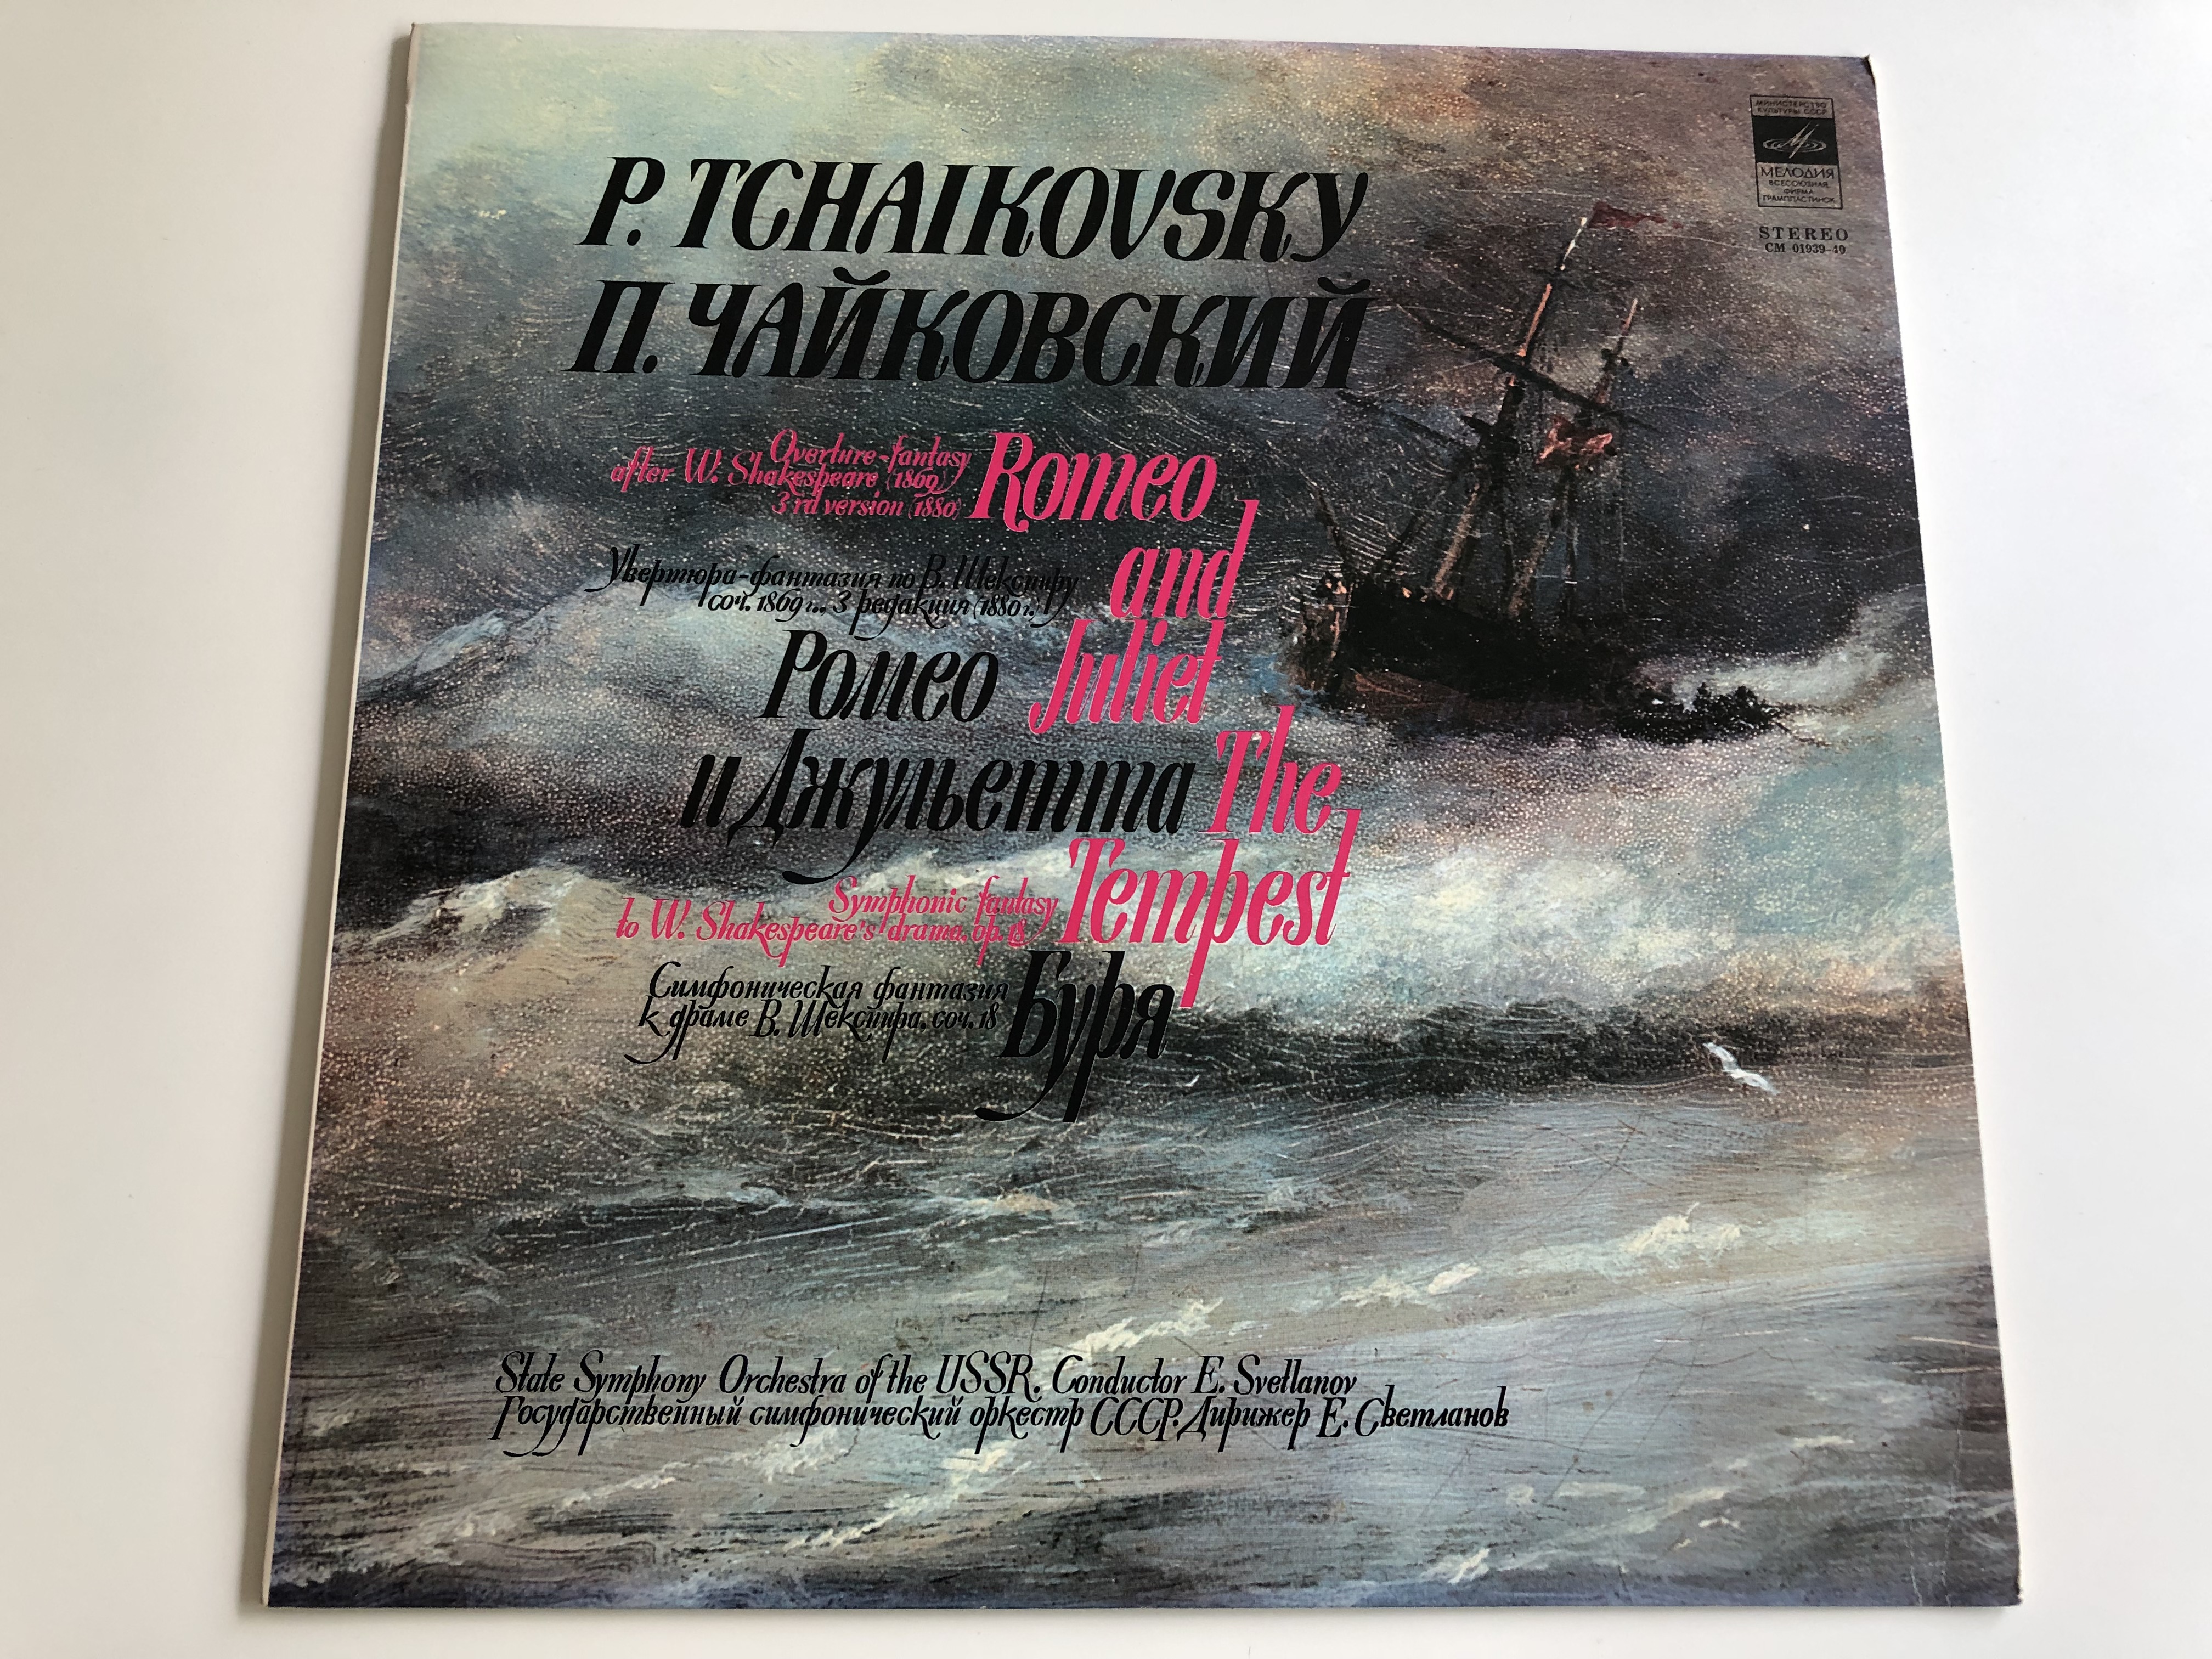 p.-tchaikovsky-romeo-and-juliet-the-tempest-state-symphony-orchestra-of-the-ussr-conductor-e.-svetlanov-lp-stereo-cm-01939-40-1-.jpg